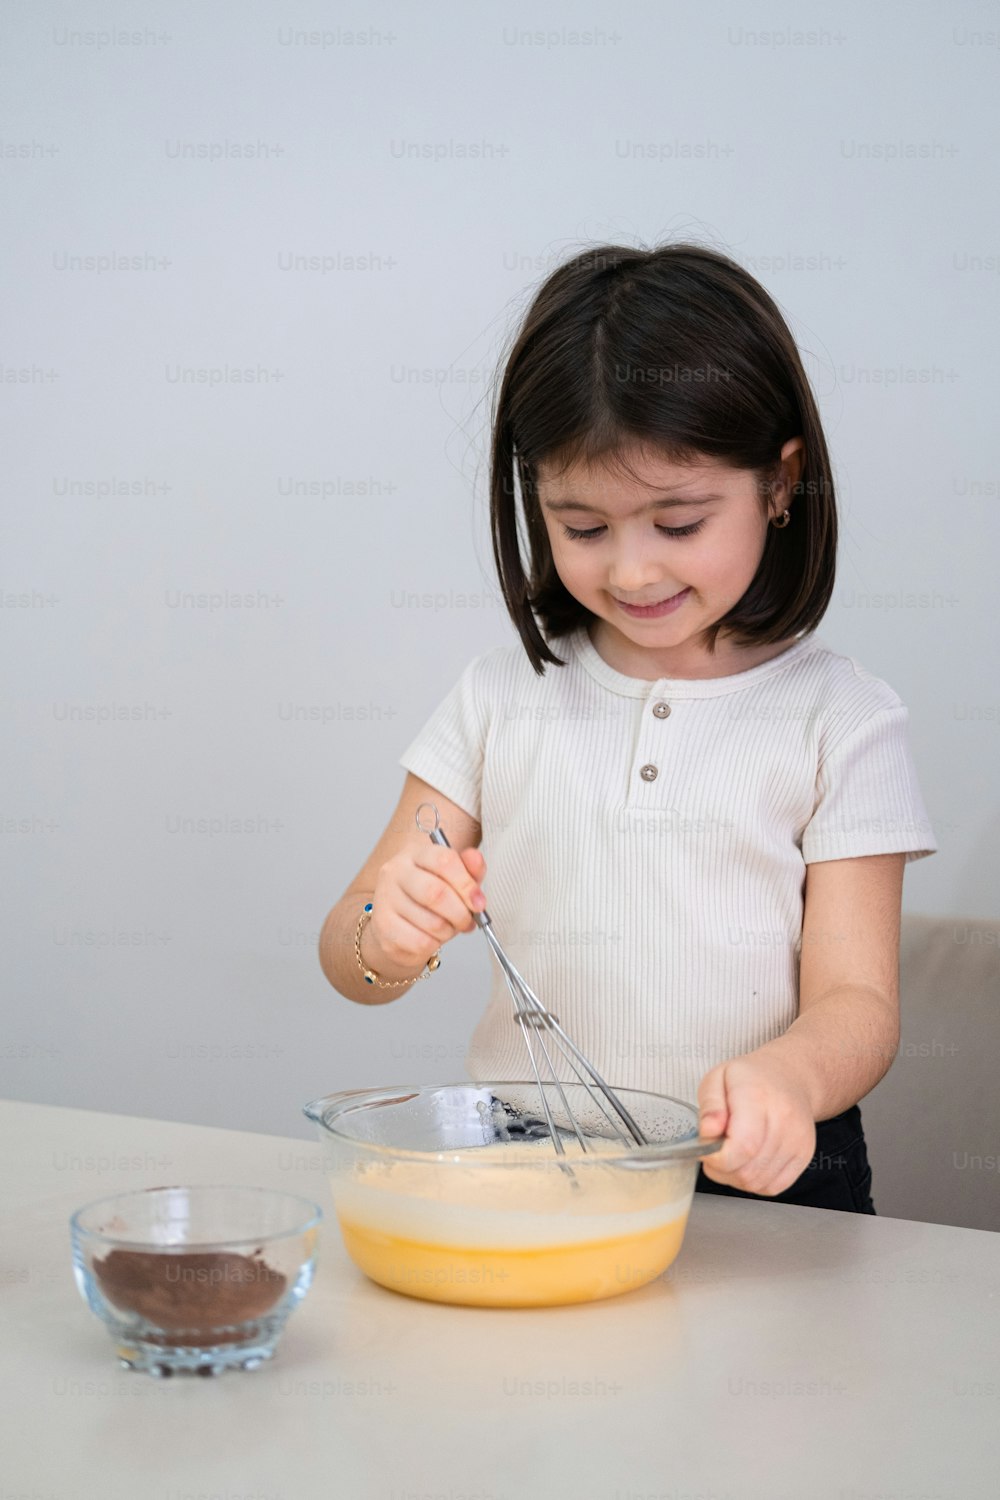 a little girl mixing something in a bowl